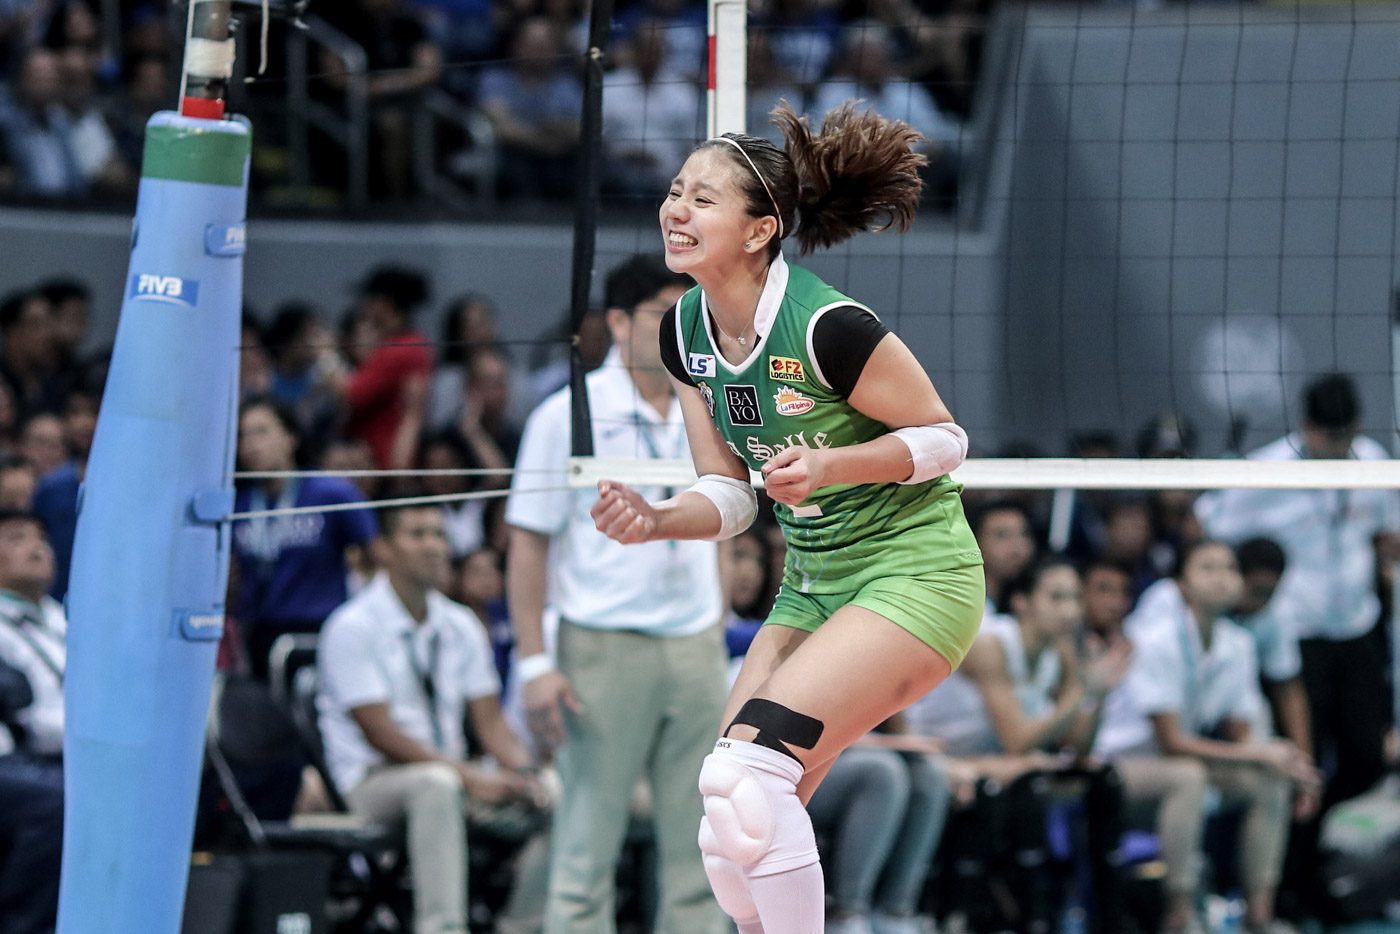 WATCH: La Salle Lady Spikers return to make history